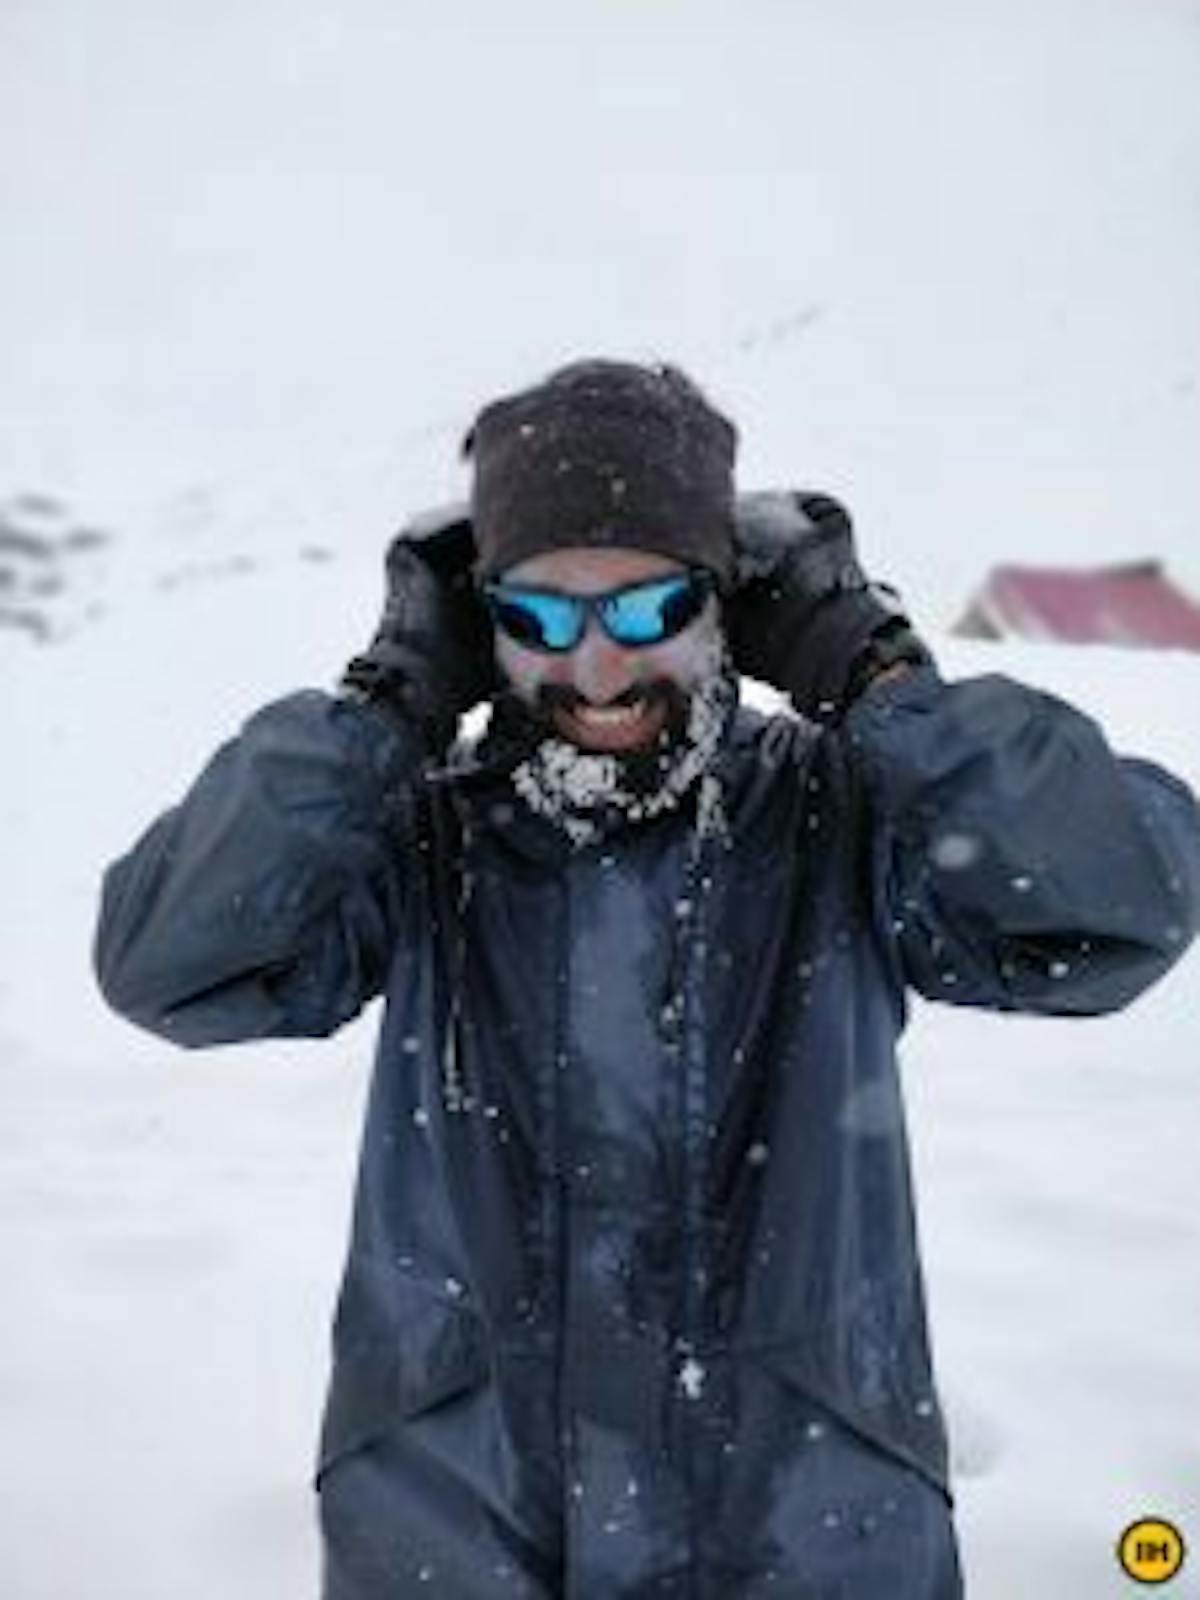 how to use sunglasses with spectacles, trekking tips, gear related tips